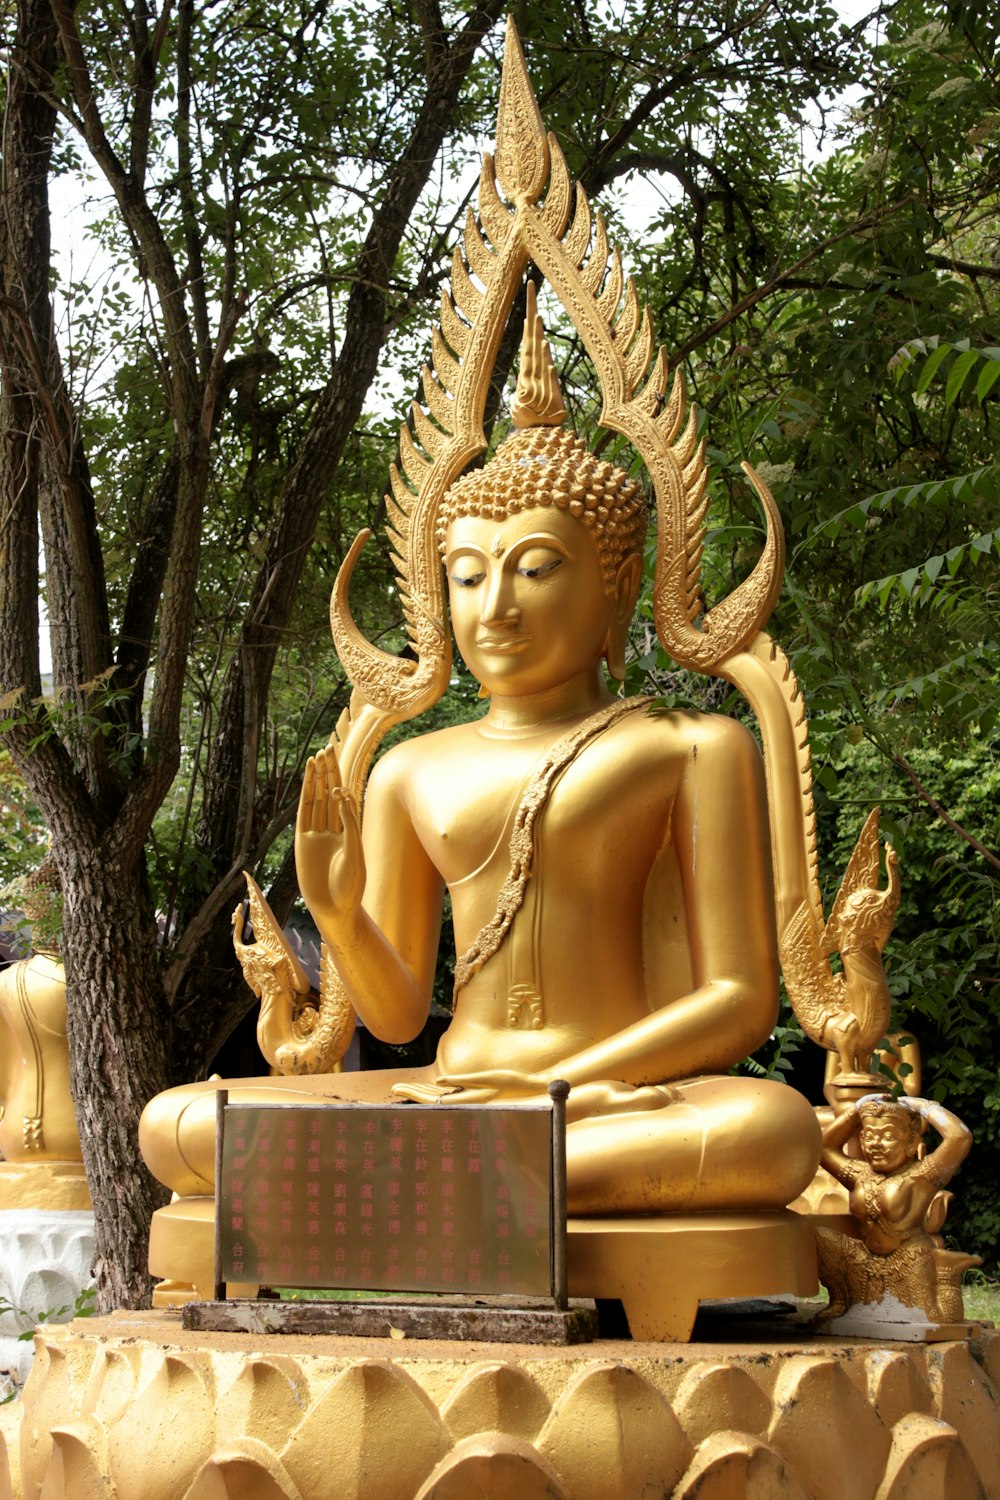 gold buddha statue near green trees during daytime